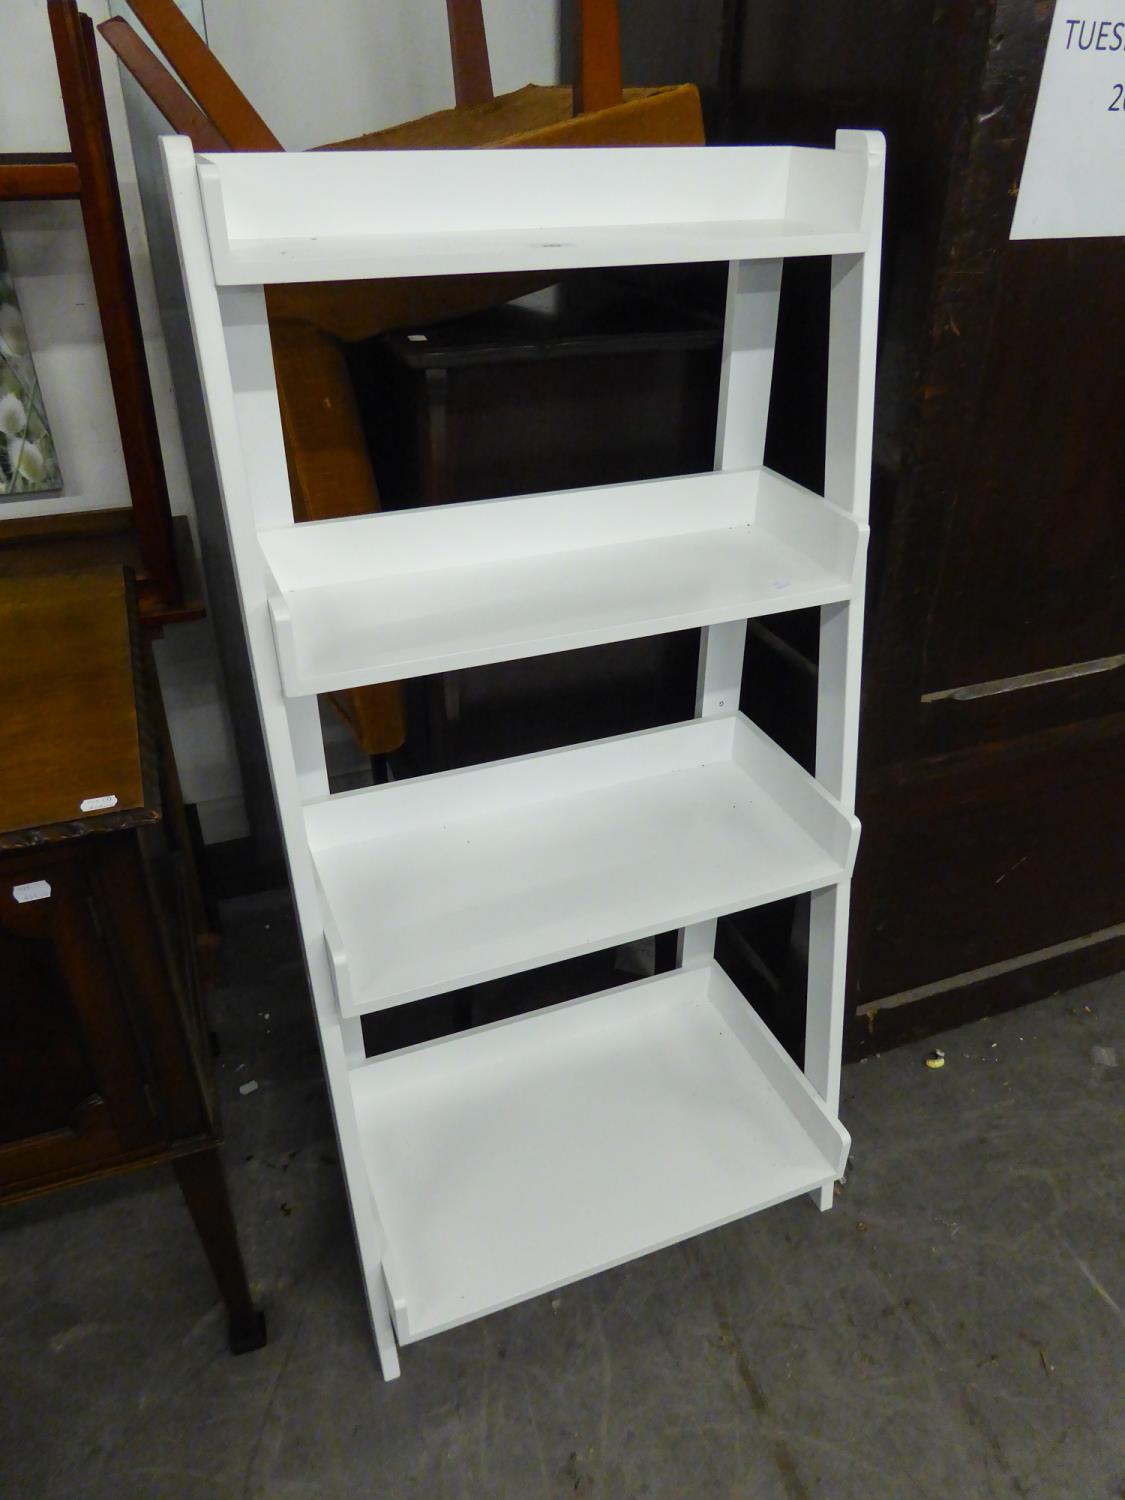 A FOUR TIER WHITE WATERFALL BOOKCASE/PLANT STAND (3' 11" high x 1'11" wide)